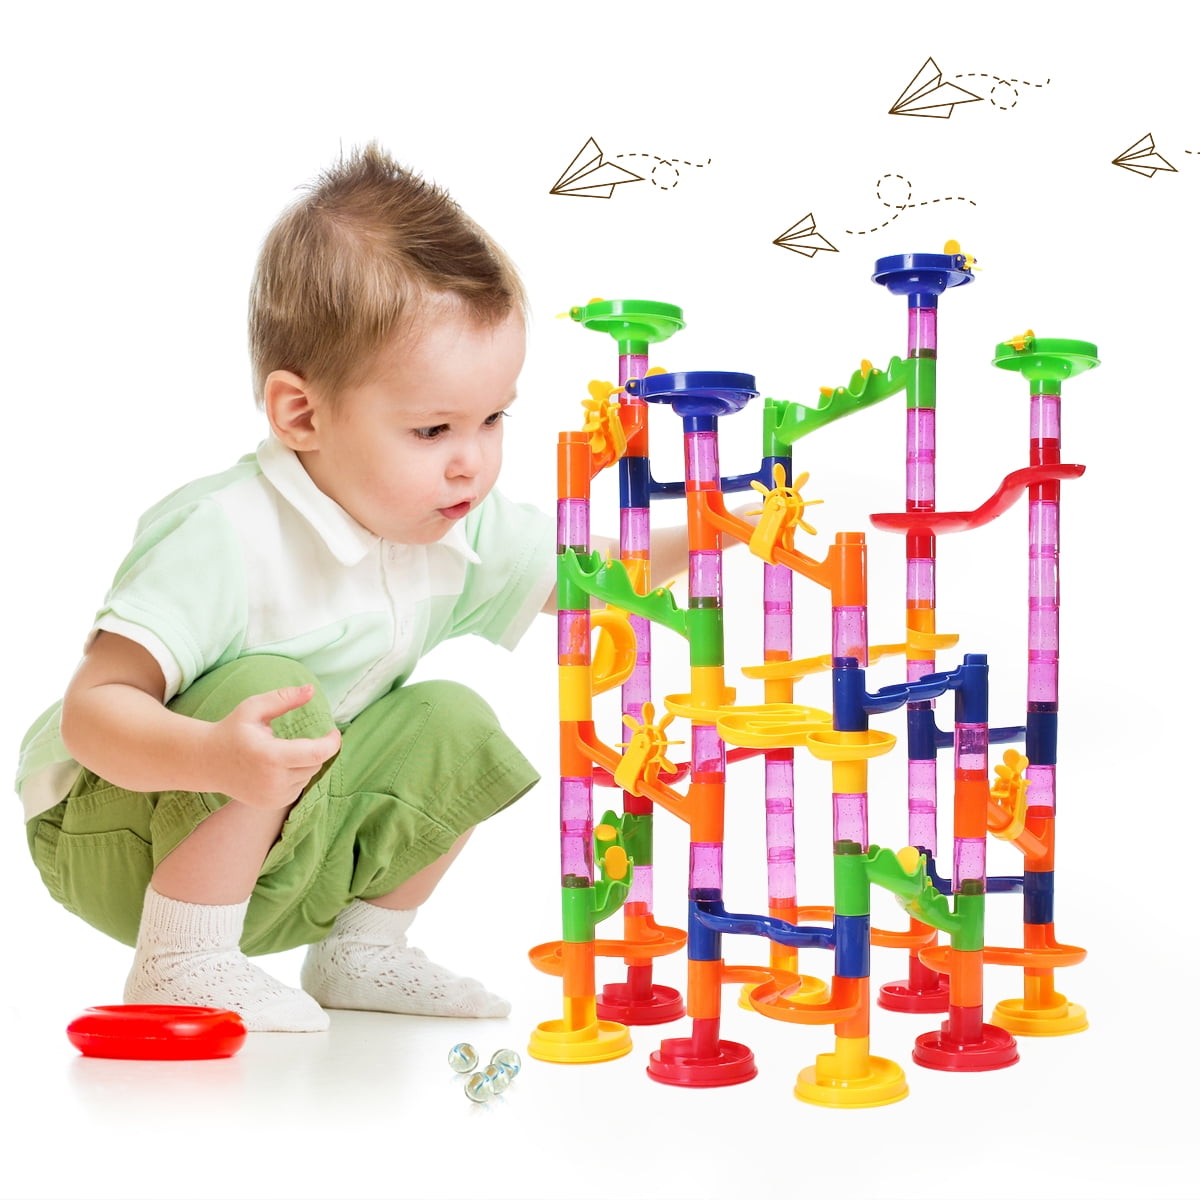 Toddler Toy Marble Run 80 Piece Kids Play Game Pretend Pre-School Young Children 